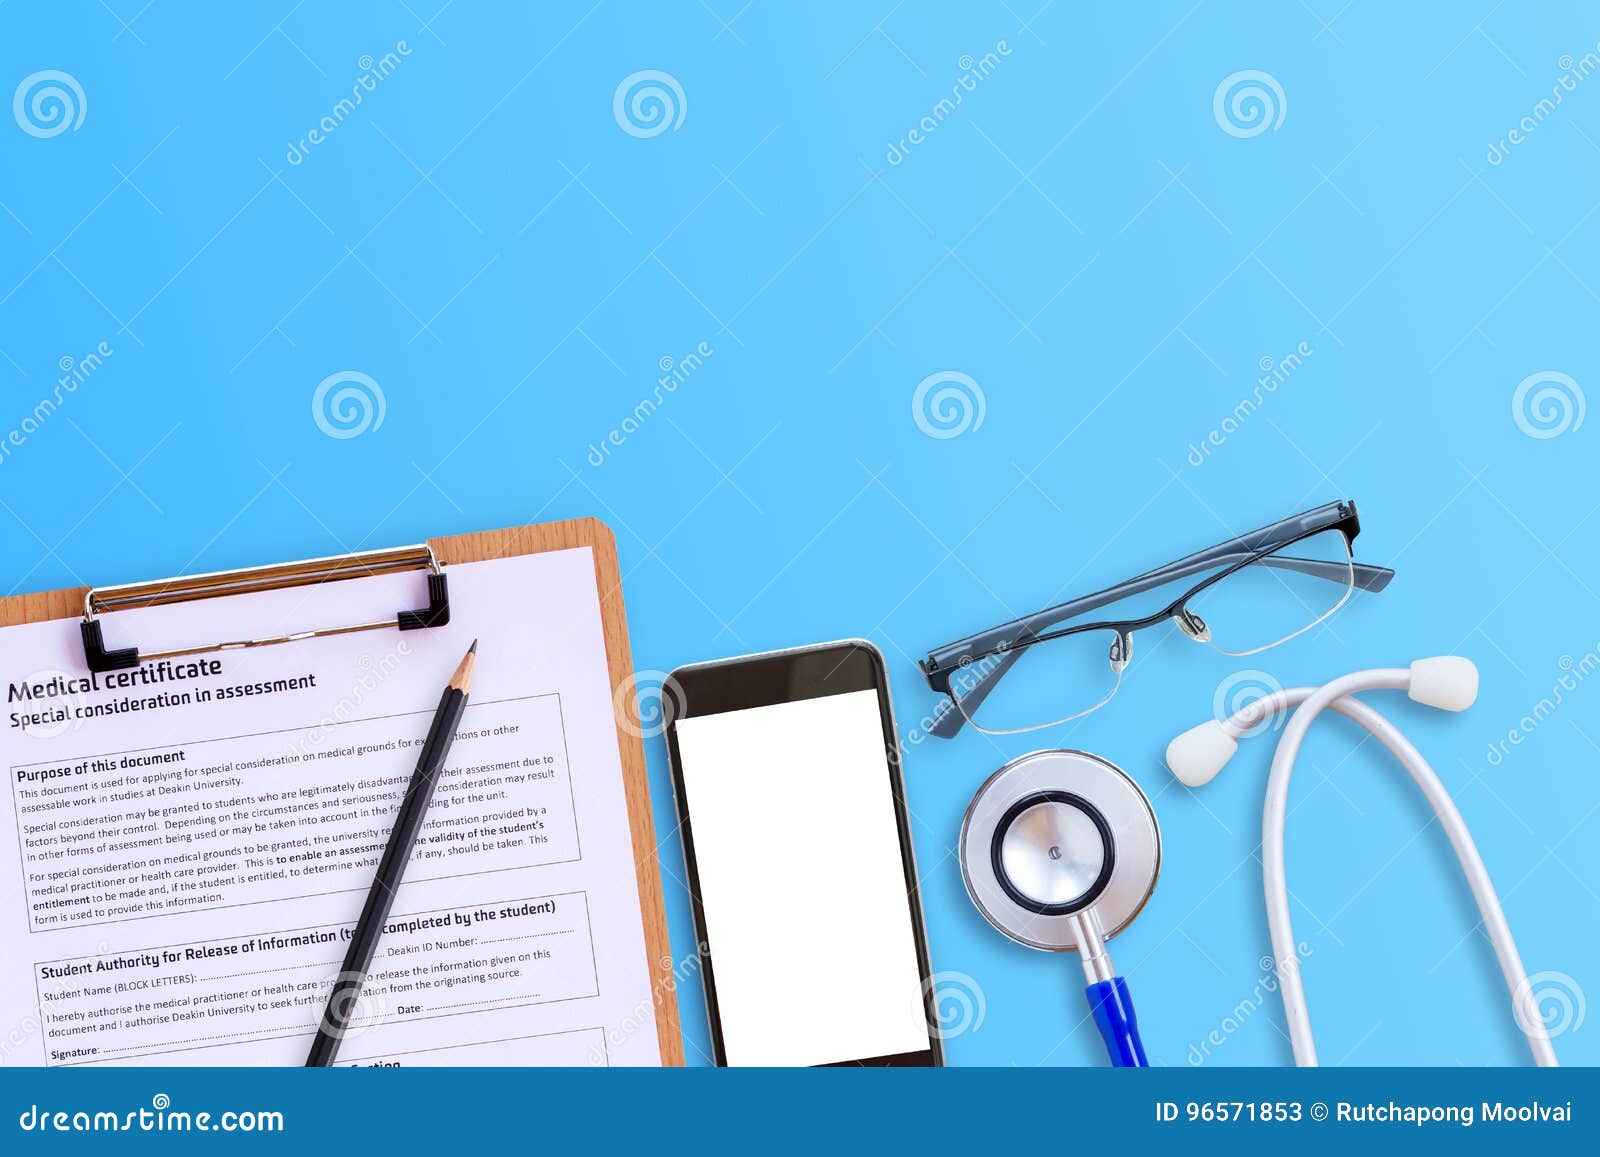 medical form with smart phone and blue stethoscop on wooden desk